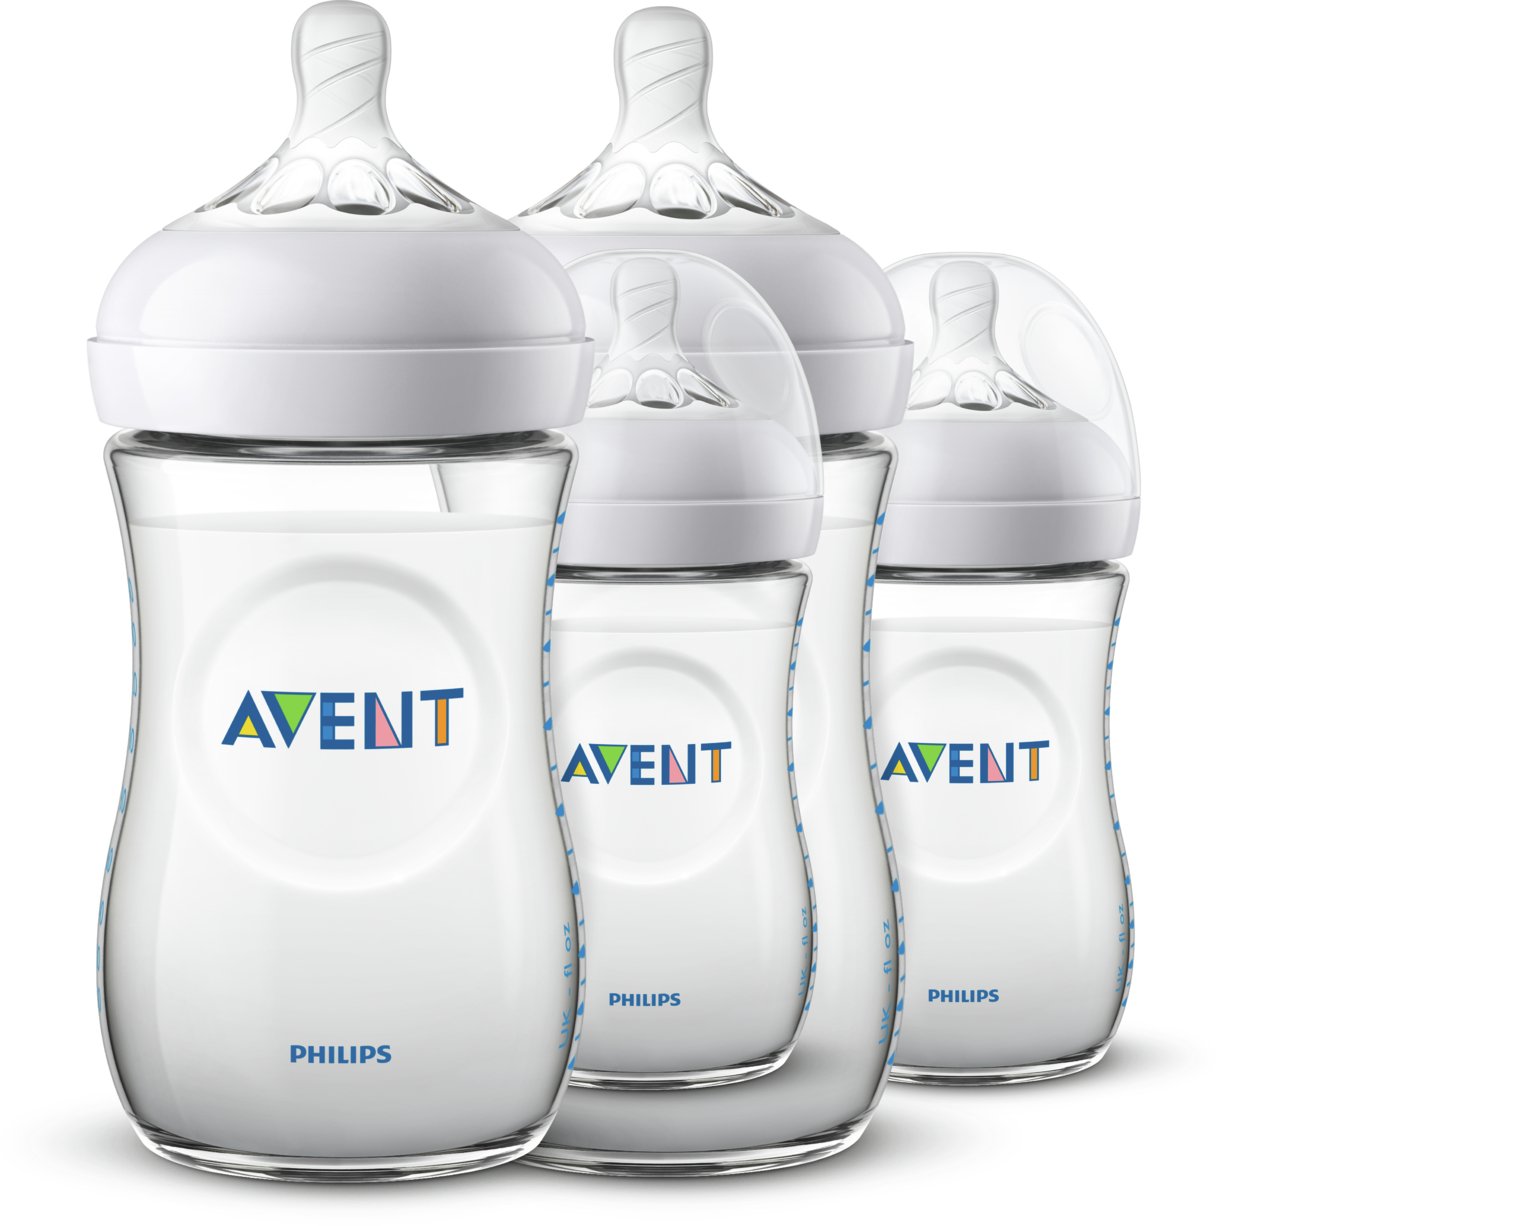 Philips Avent Natural Bottle 9oz 1 month+ - 2 Pack